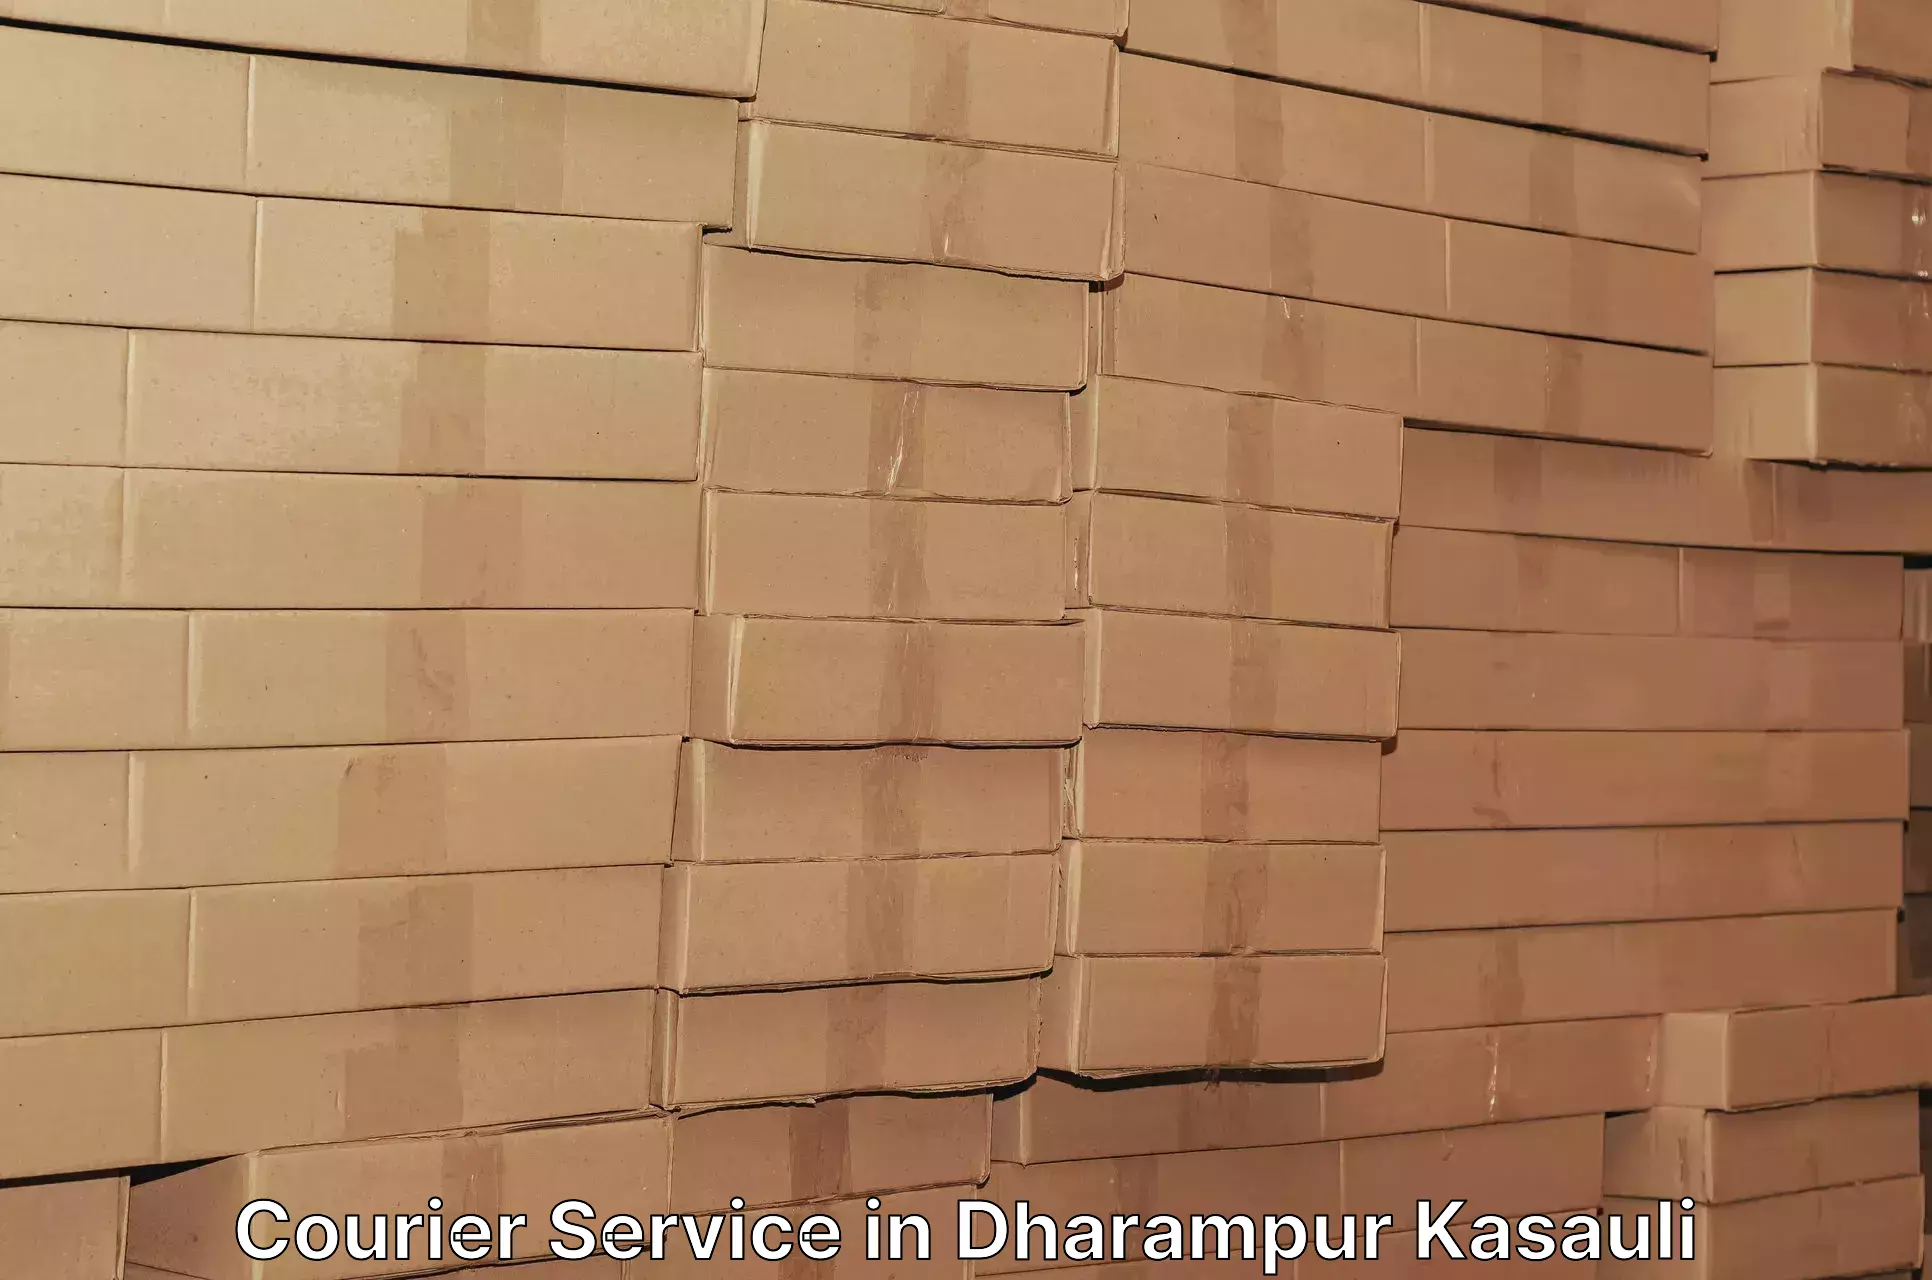 Global shipping solutions in Dharampur Kasauli